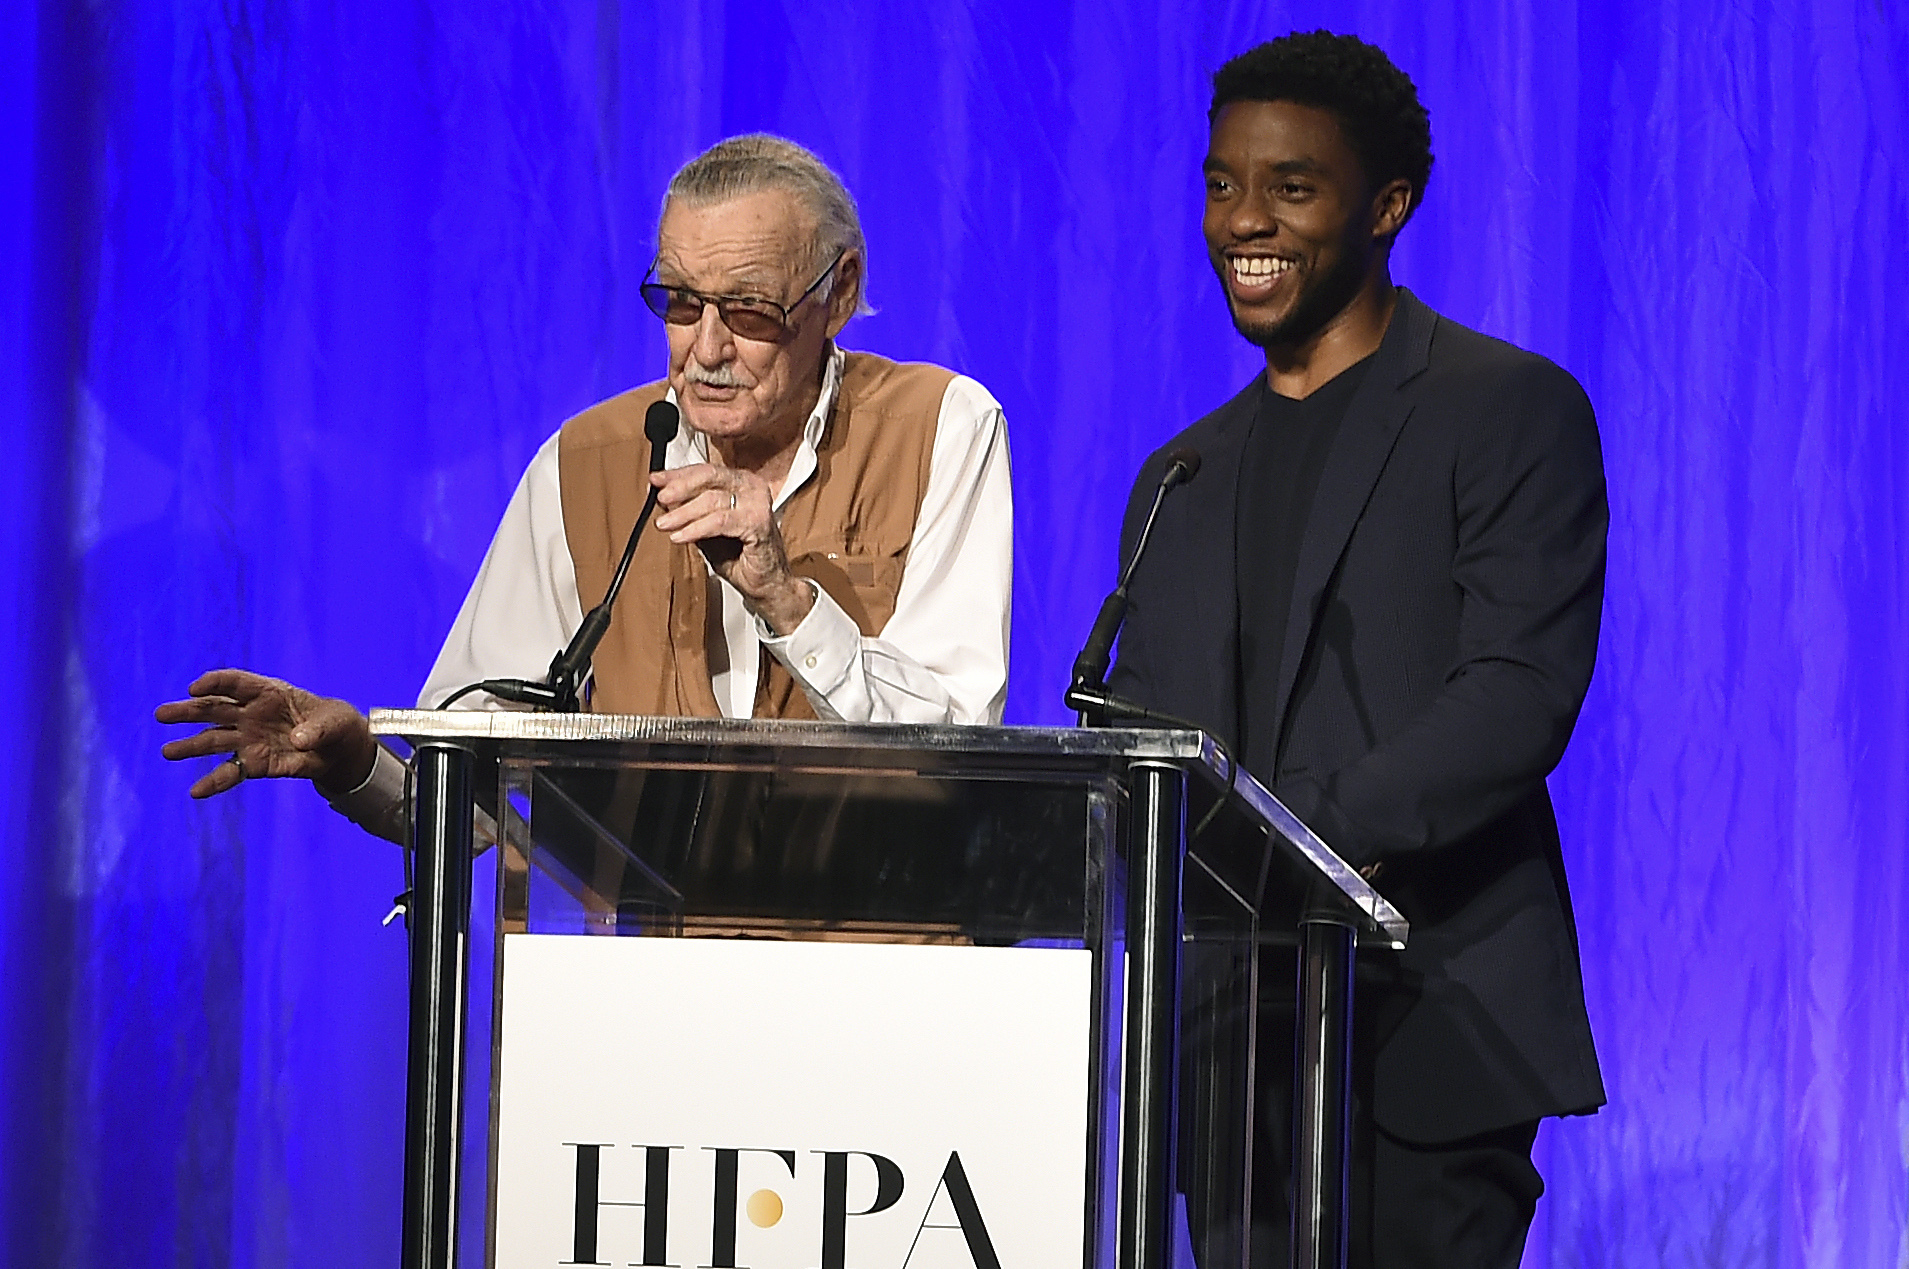 Stan Lee and Chadwick Boseman, of Marvel's "Black Panther," speak at the Hollywood Foreign Press Association Grants Banquet at the Beverly Wilshire Hotel on Wednesday, Aug. 2, 2017, in Beverly Hills, Calif.